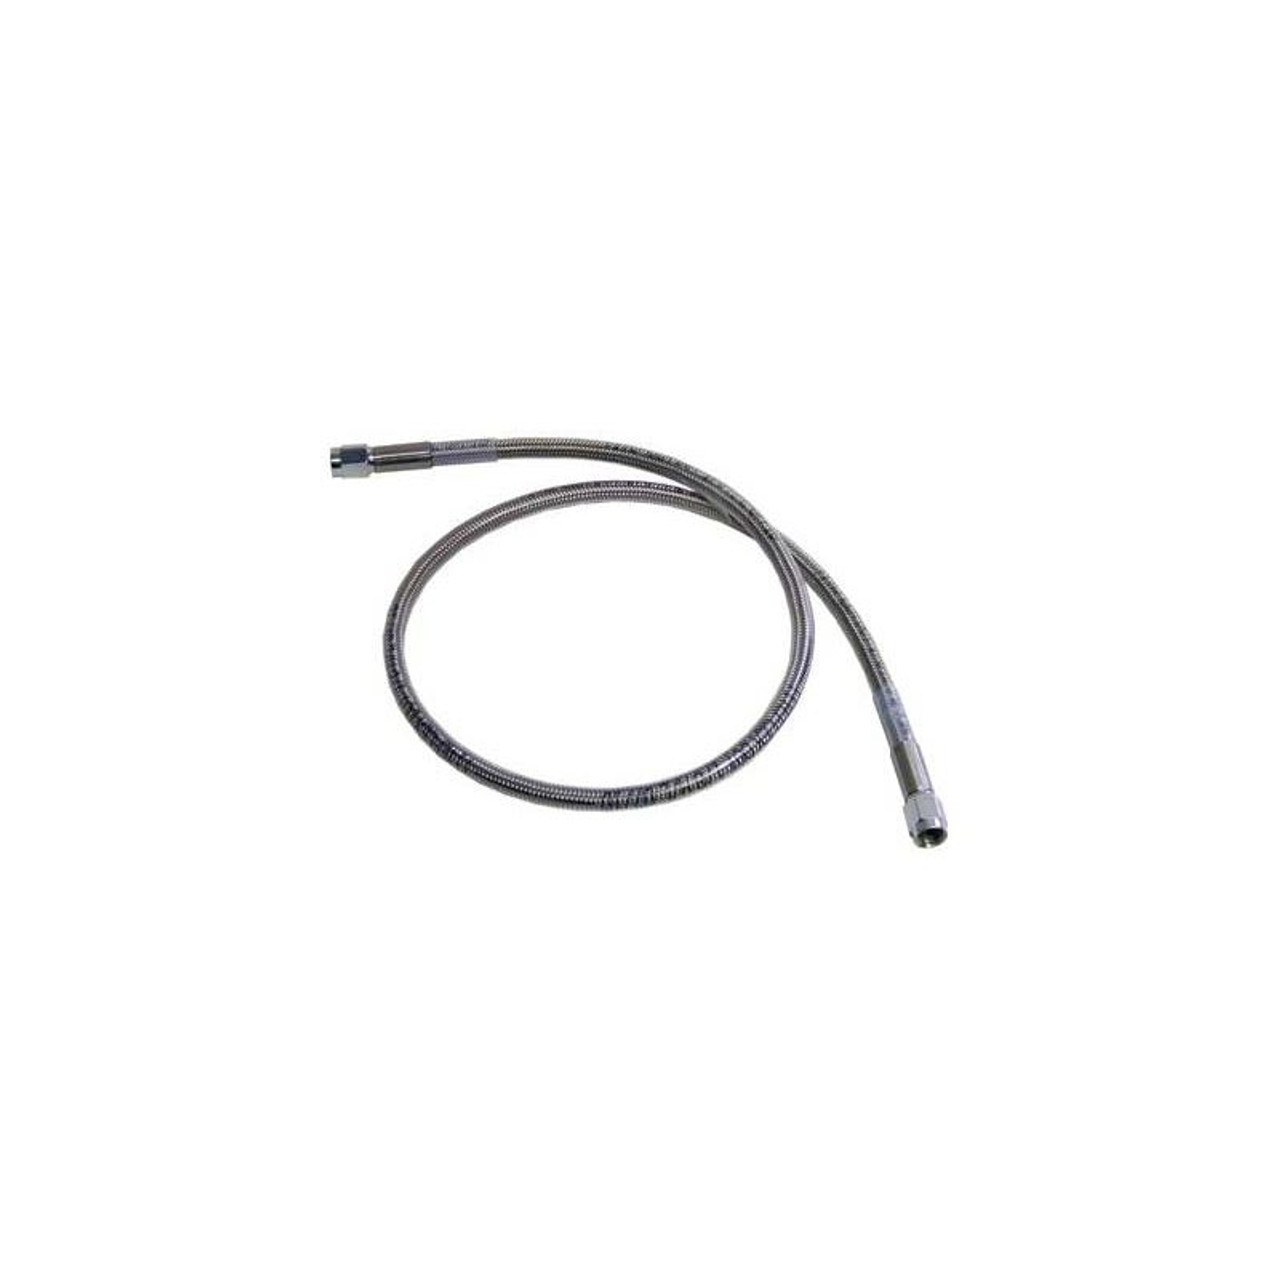 Big End Performance 21120 -3AN Stainless Steel Brake Line, 20 in